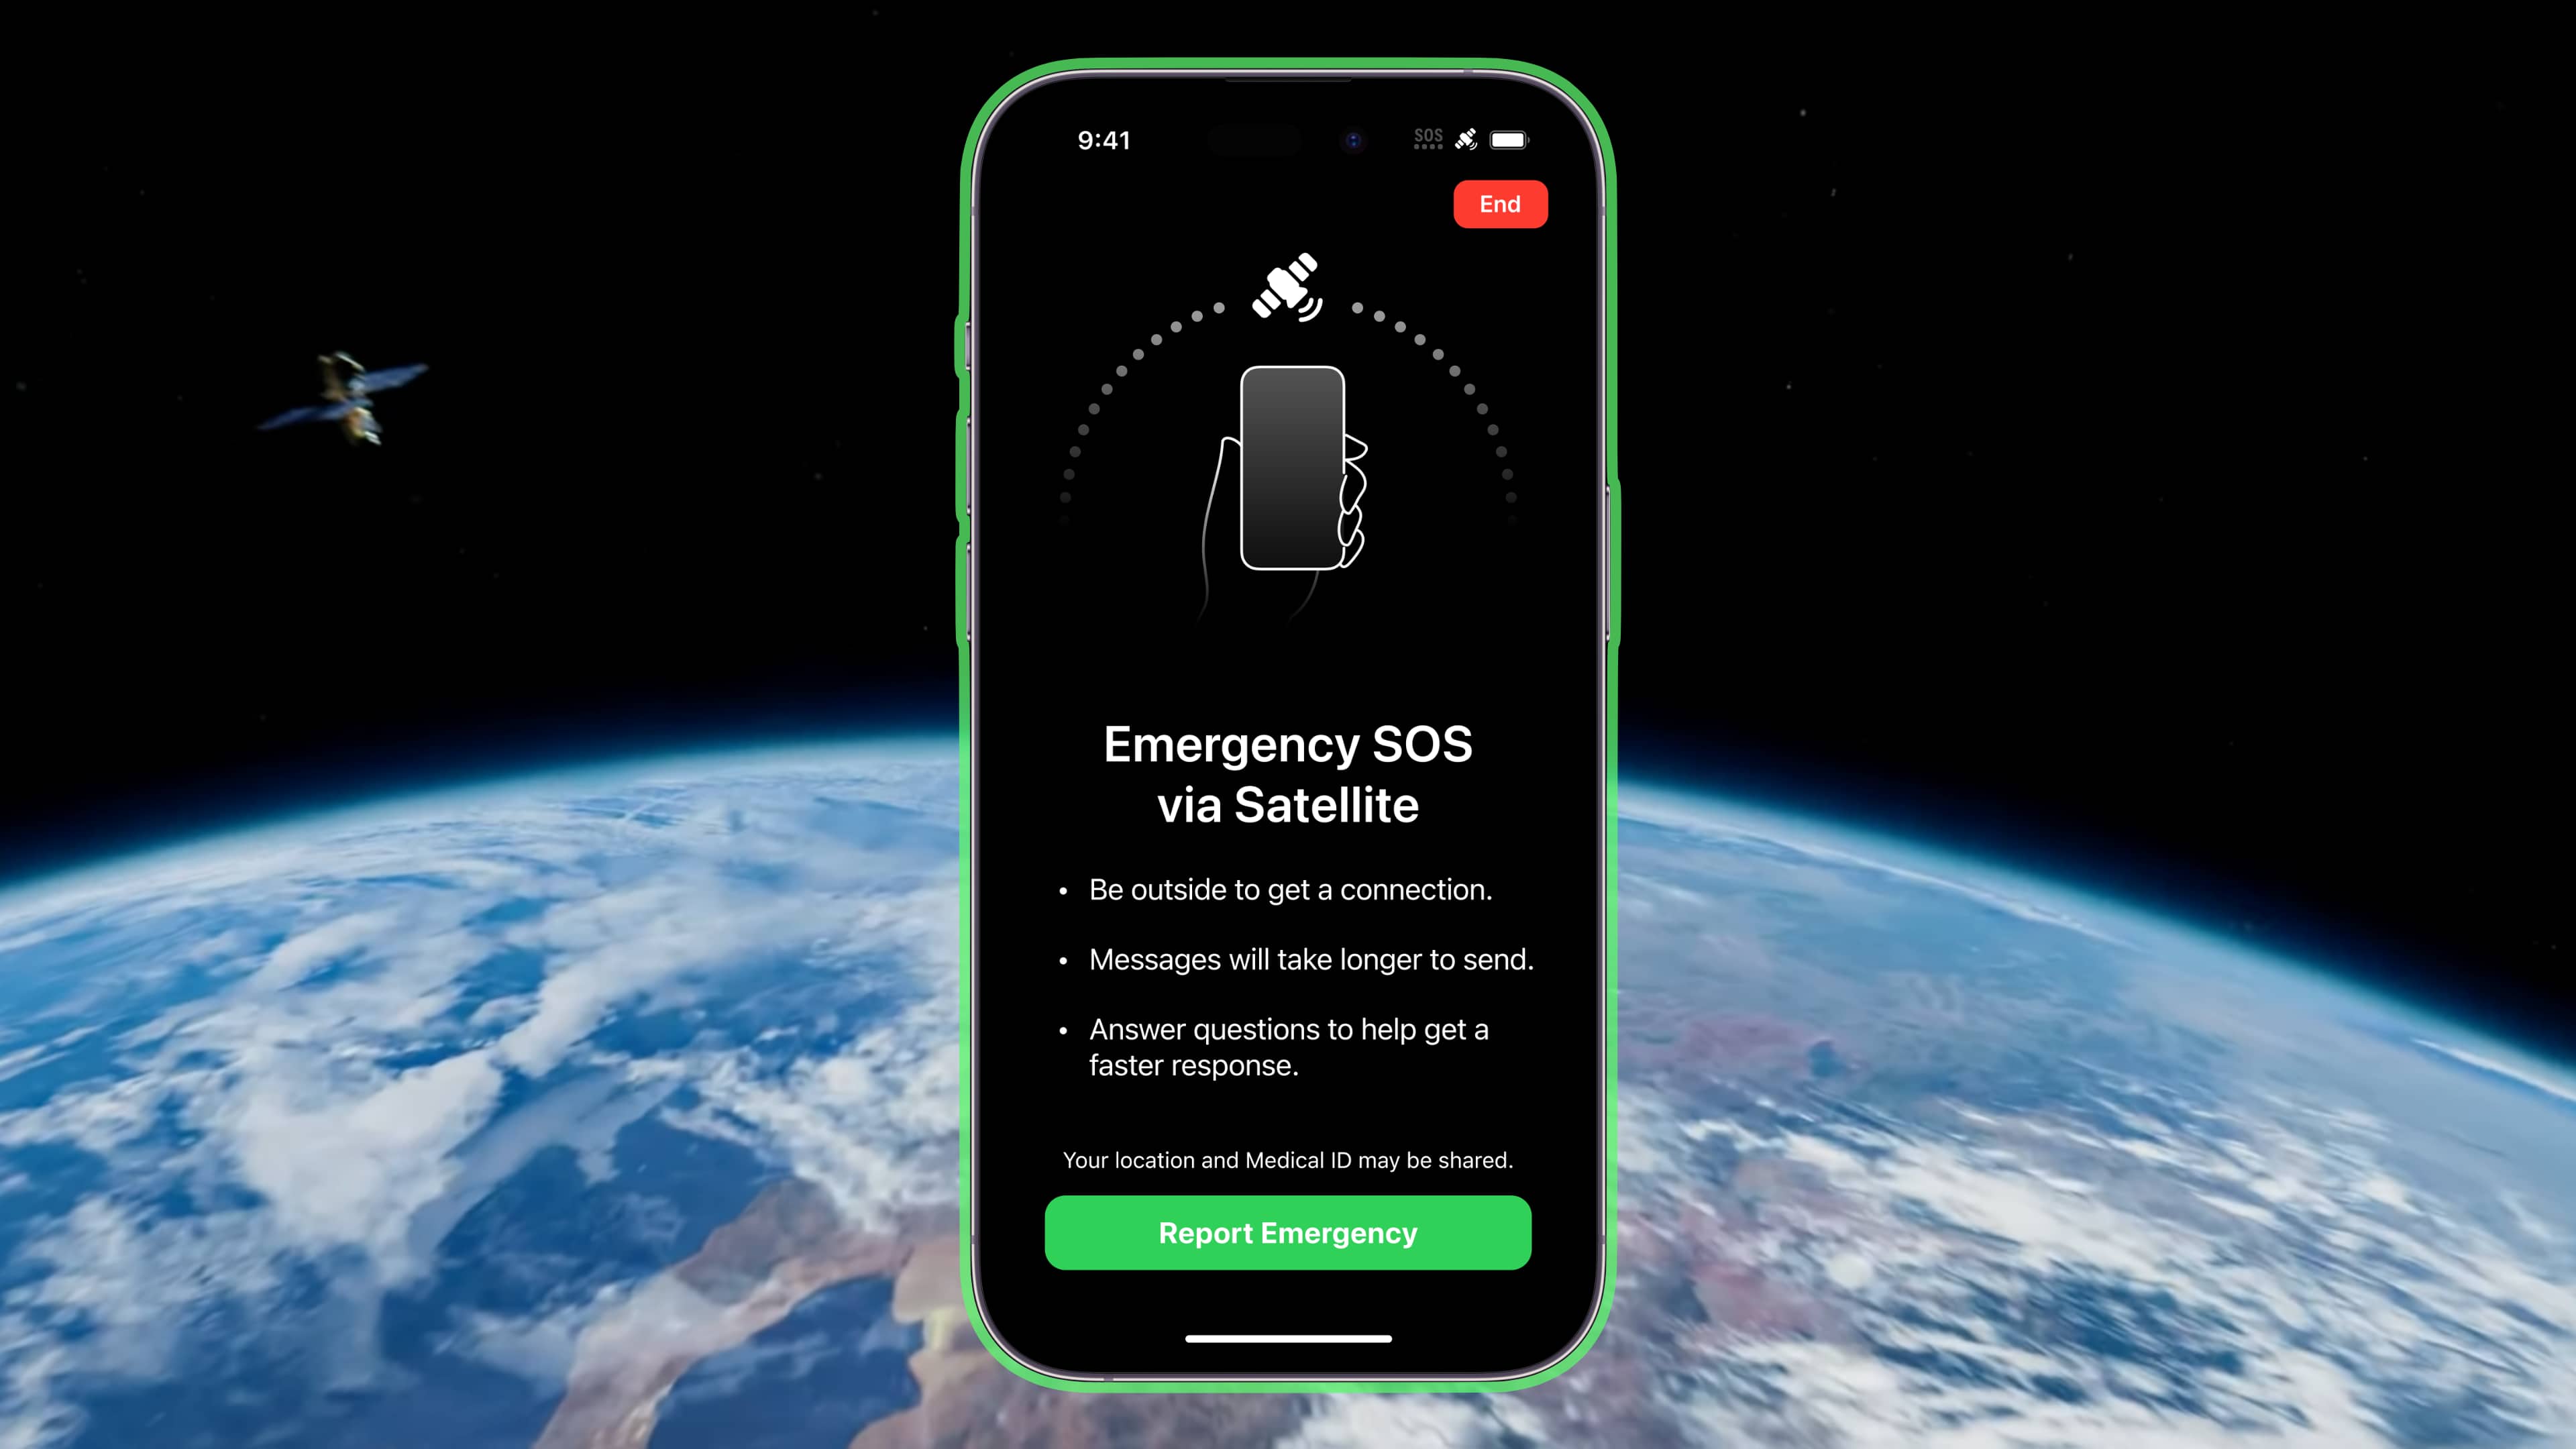 Composition showing a splash screen for Emergency SOS via satellite on iPhone, with a shot of planet Earth in the background